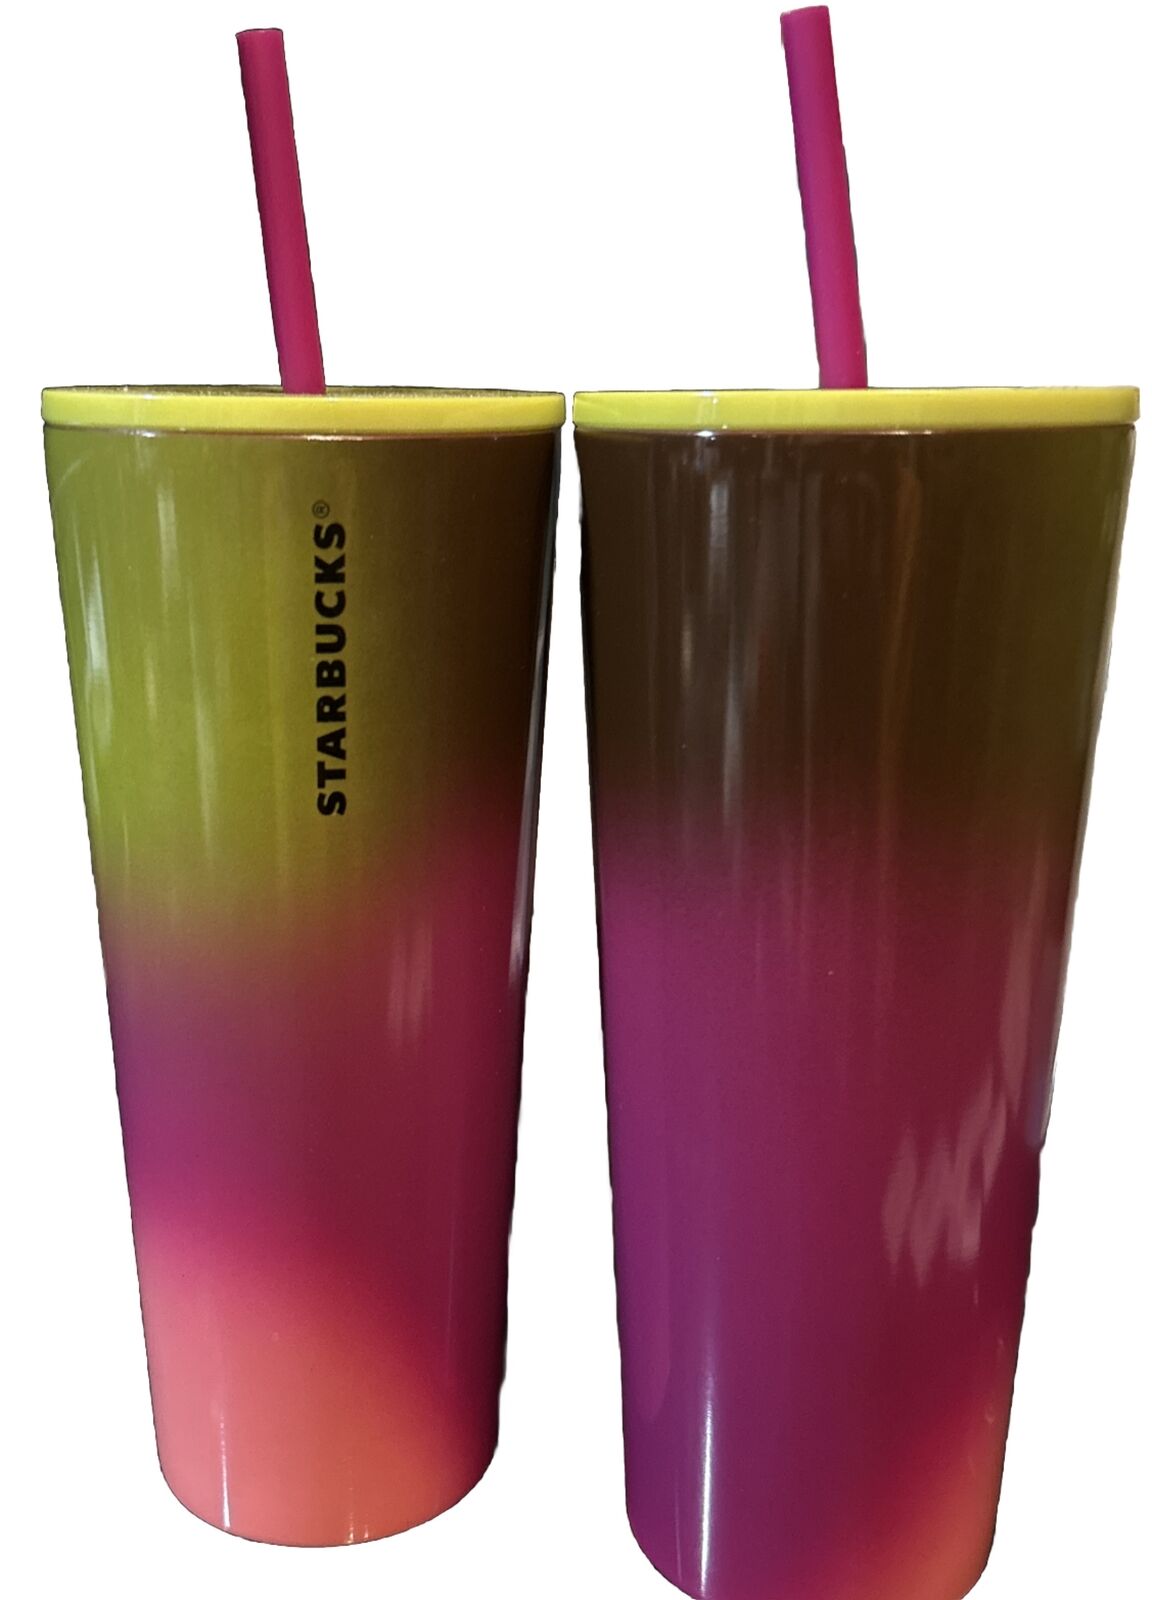 2 - Starbucks Stainless Steel Cold Cup Multicolor Berry Gradient Lid Straw Ombré